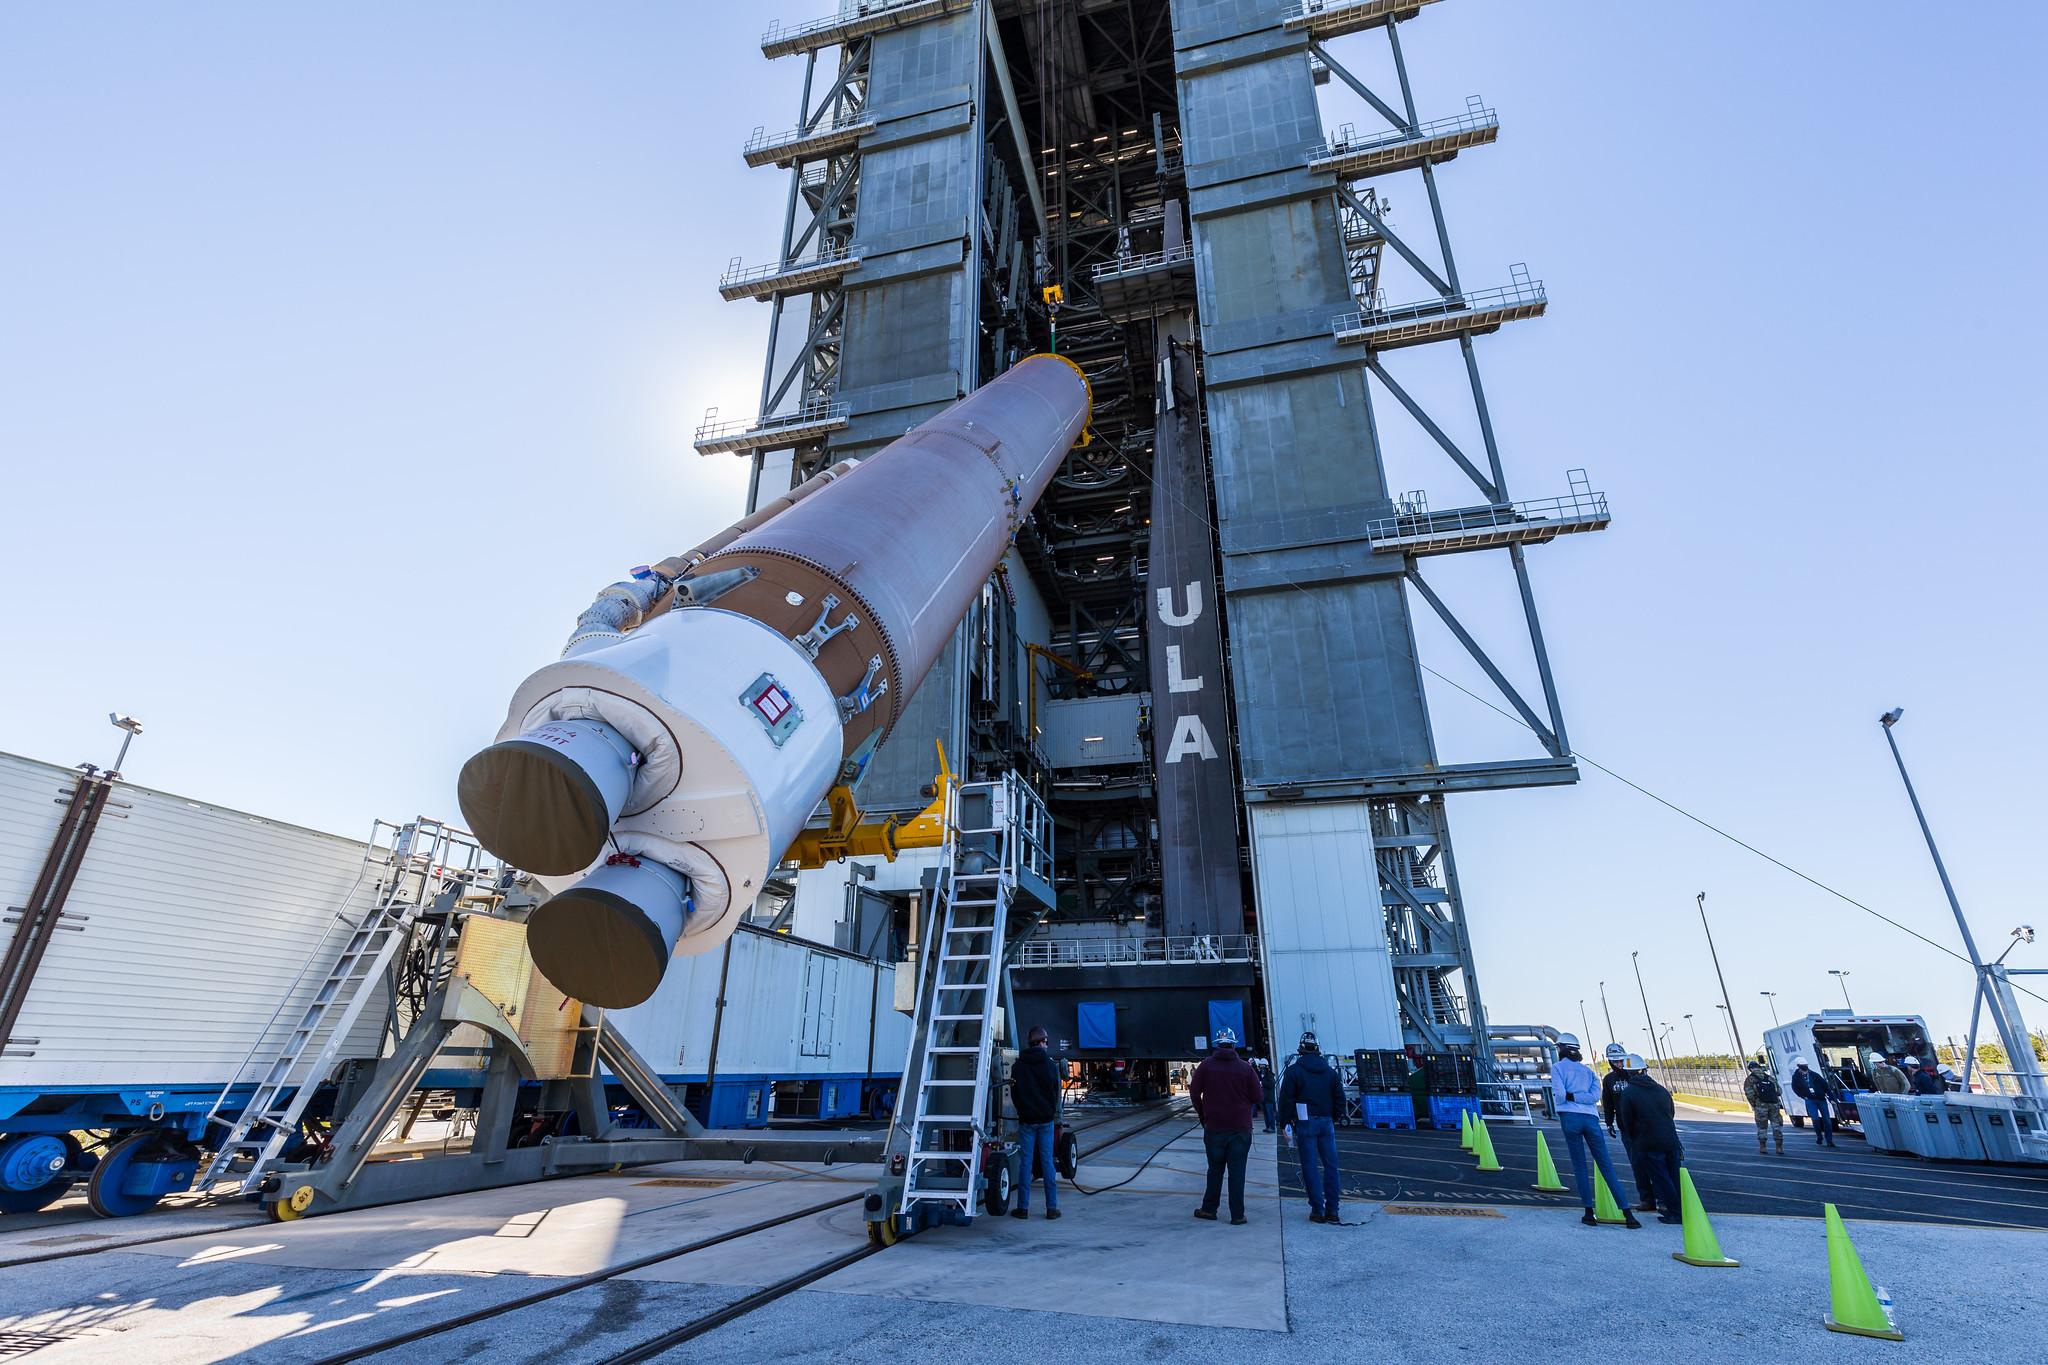 GOES-T satellite being loaded into its launch vehicle